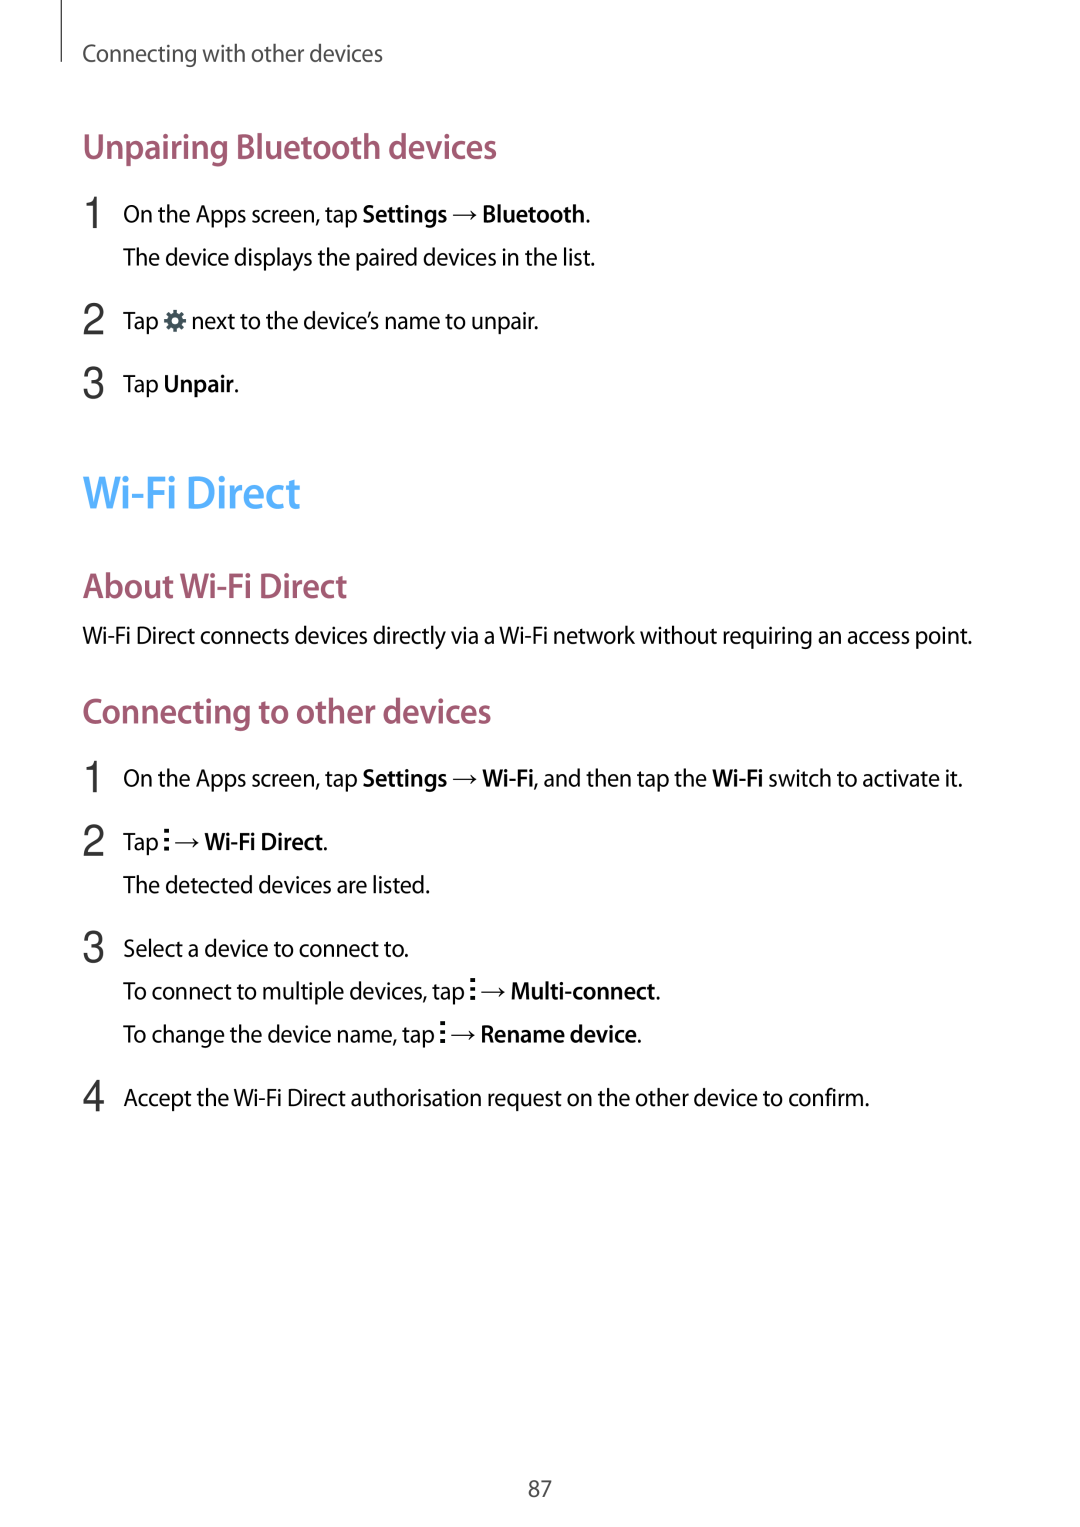 Samsung SM-A300FZWUWIN manual Unpairing Bluetooth devices, About Wi-Fi Direct, Connecting to other devices, Tap Unpair 